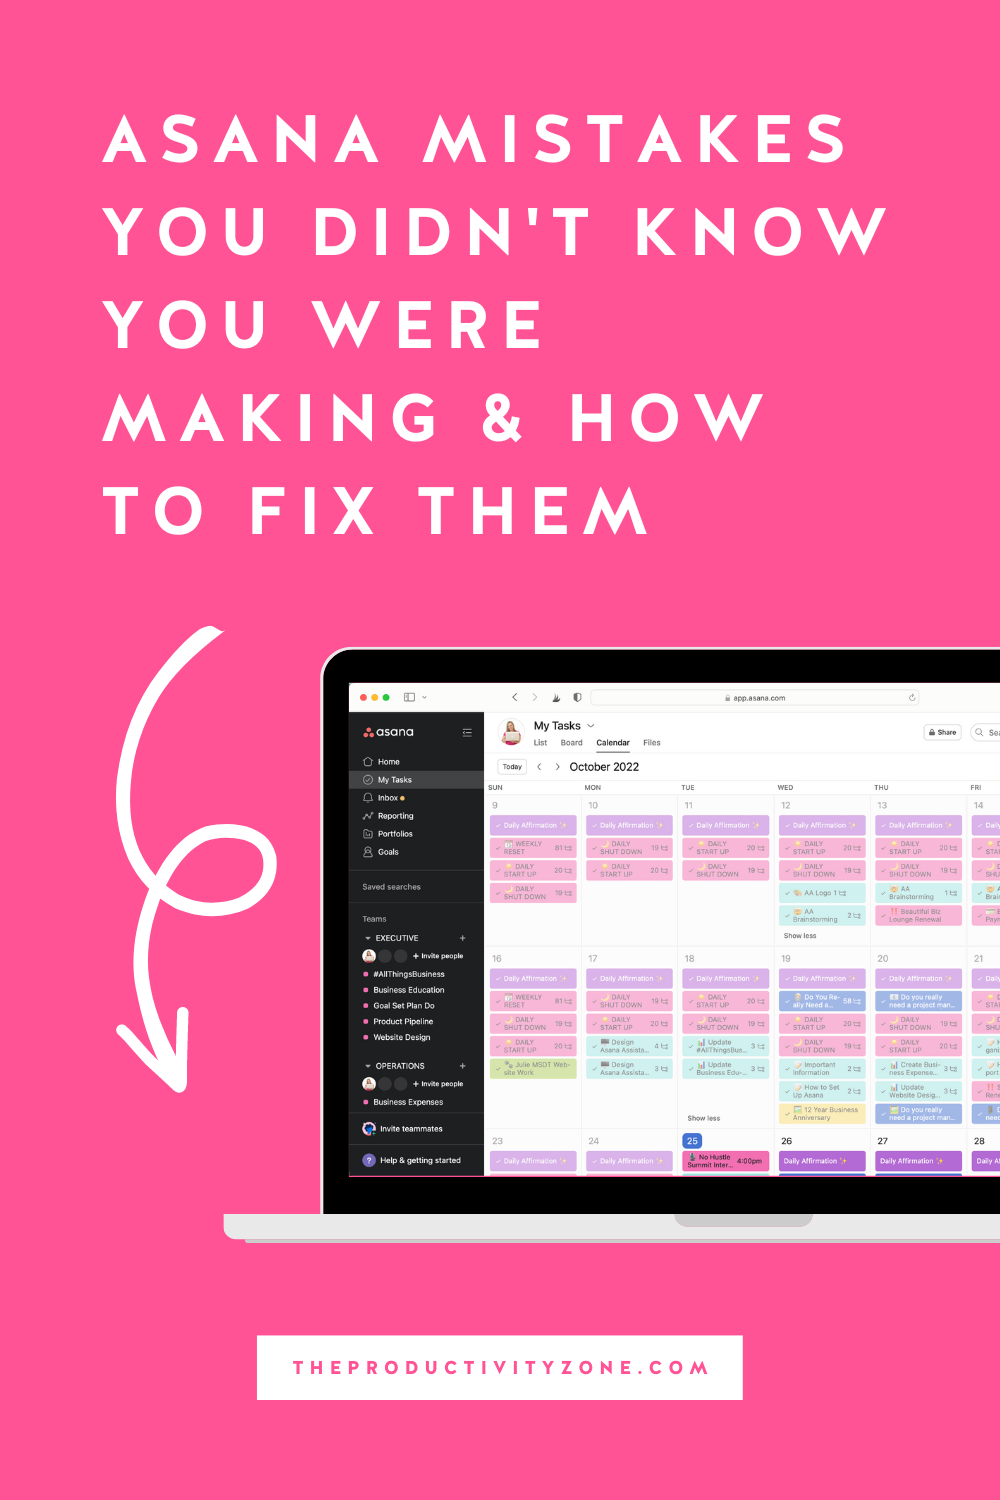 A hot pink background features the headline "Asana Mistakes You Didn't Know You Were Making & How to Fix Them" in bold white letters. There is also a curly white arrow pointing down to a laptop mockup with Asana My Tasks on the screen.